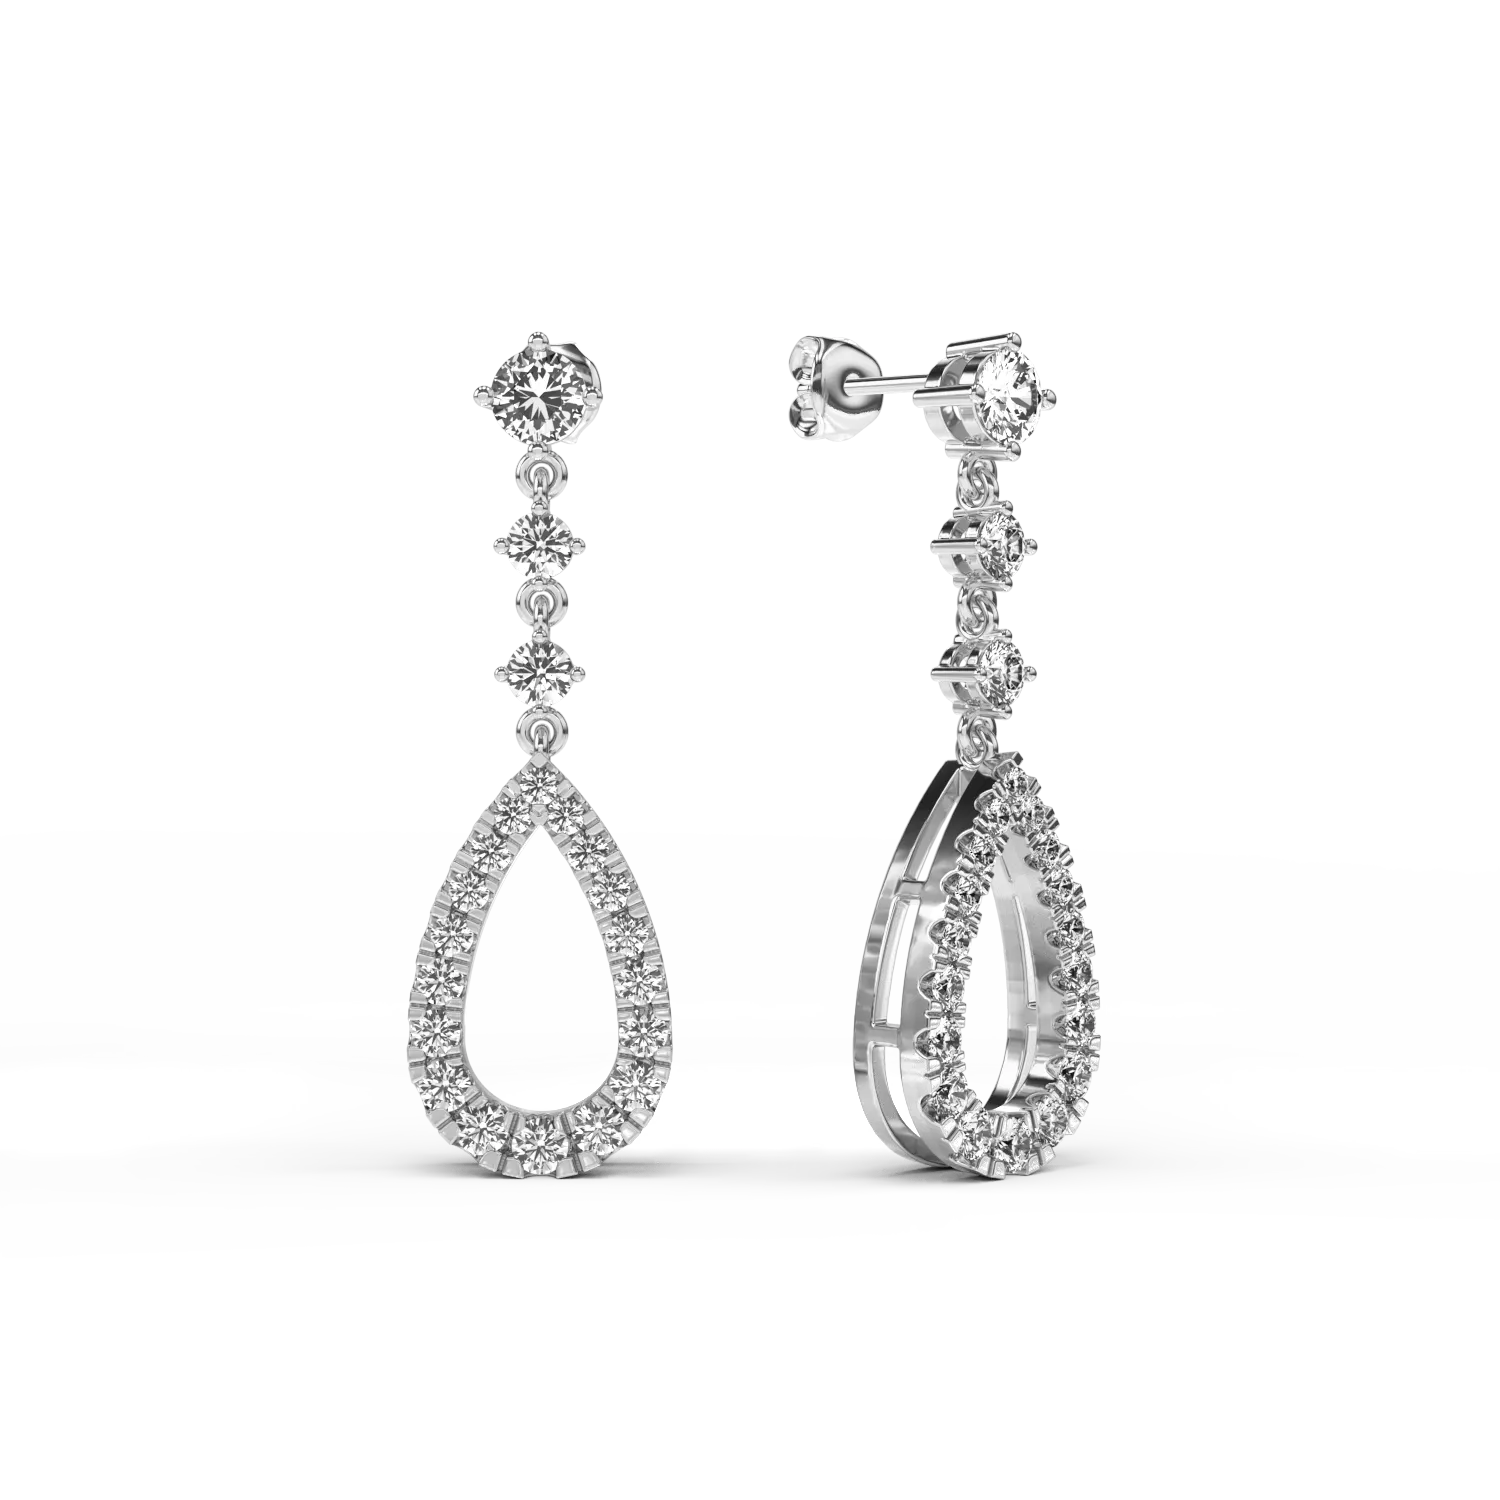 18K white gold earrings with 0.928ct diamonds